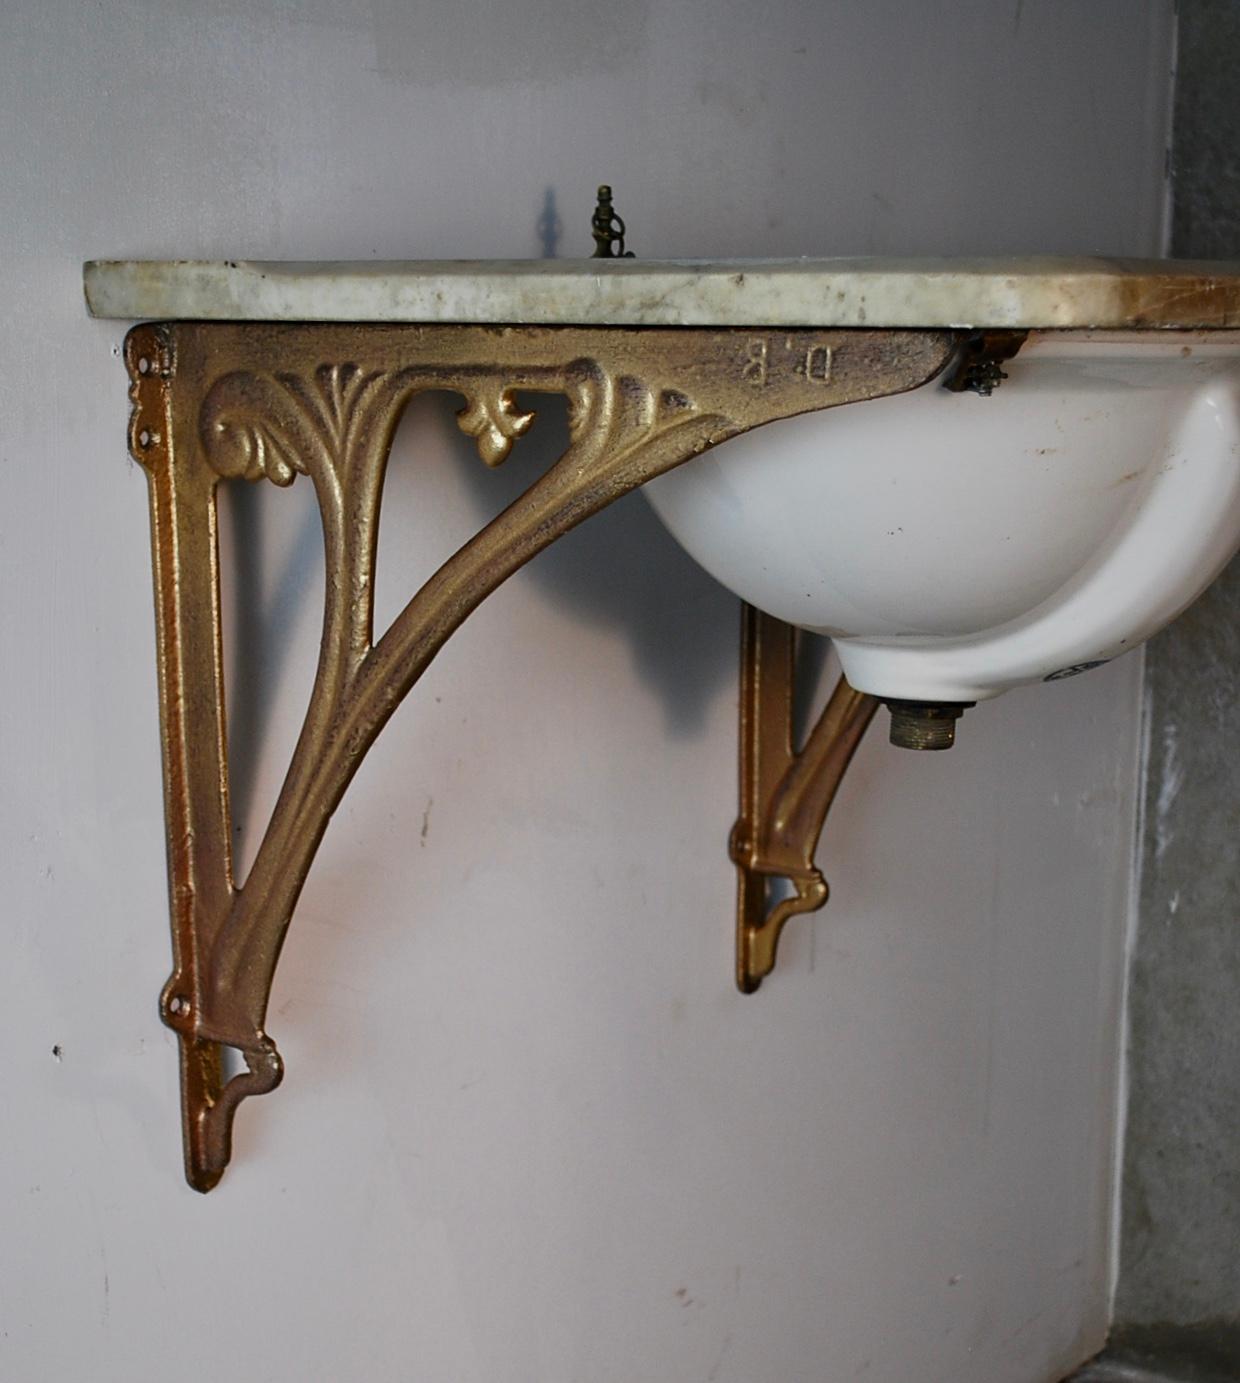 Salvaged marble counter with original sink with brass finished brackets. 
The plumbing mechanism is easily adaptable for new pipes .The sink is equipped with overflow drain and has no cracks.
Salvaged from an old Hotel in Vancouver years